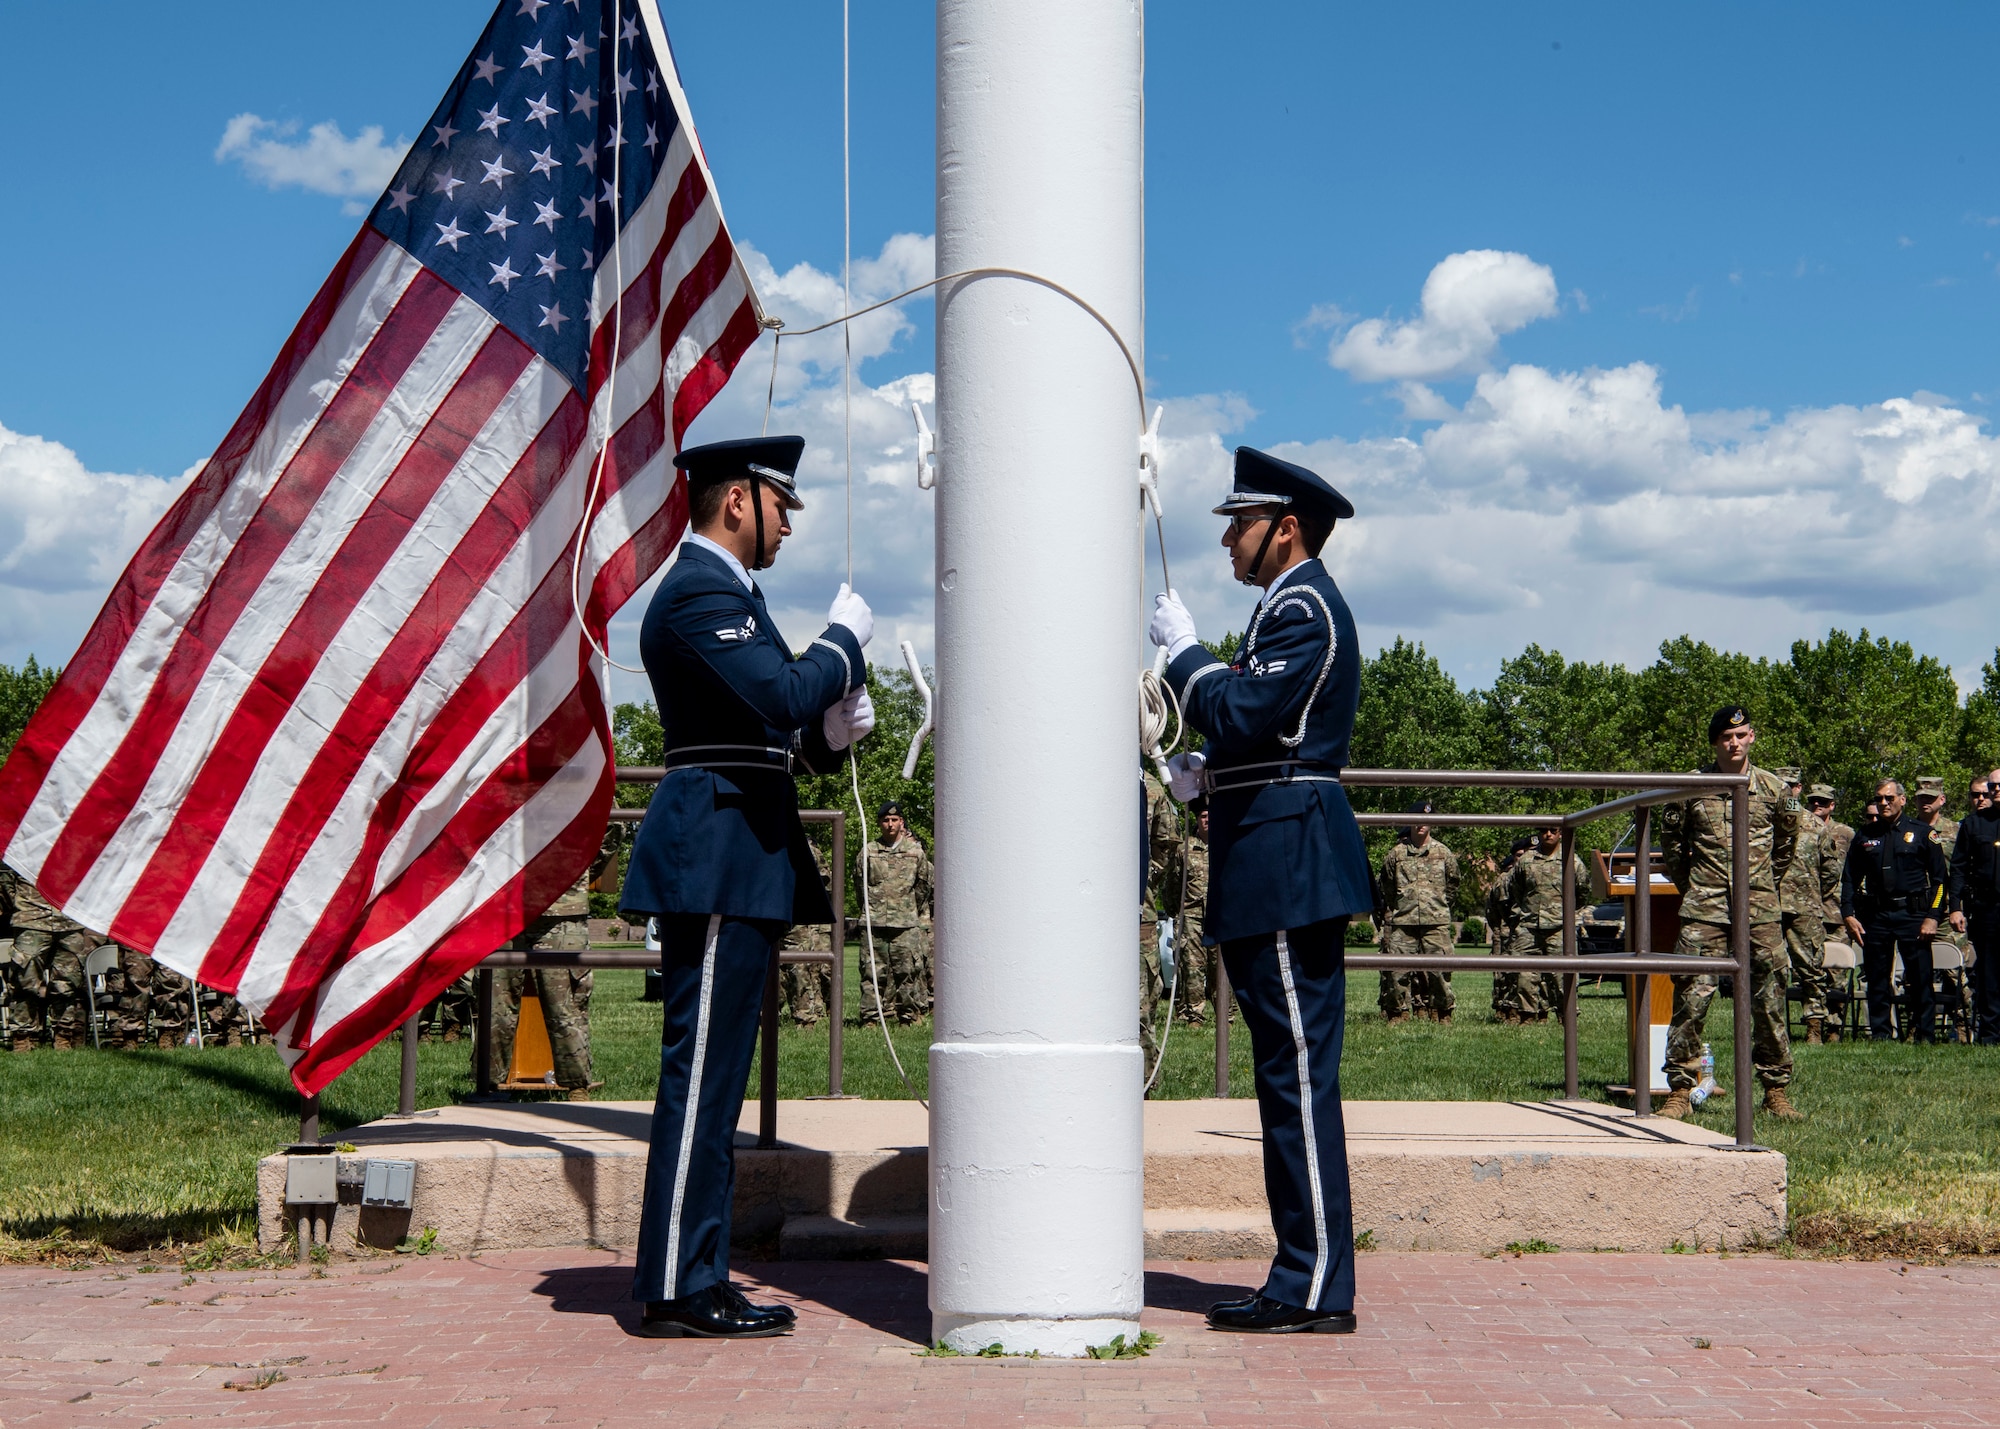 Kirtland Air Force Base Honor Guardsmen prepare to hoist the flag after lowering it from half-staff during the Police Week Memorial Retreat Ceremony at Kirtland Air Force Base, N.M., May 15. When lowering the flag from half-staff, it must first be hoisted to the peak before being lowered. (U.S. Air Force photo by Staff Sgt. J.D. Strong II)